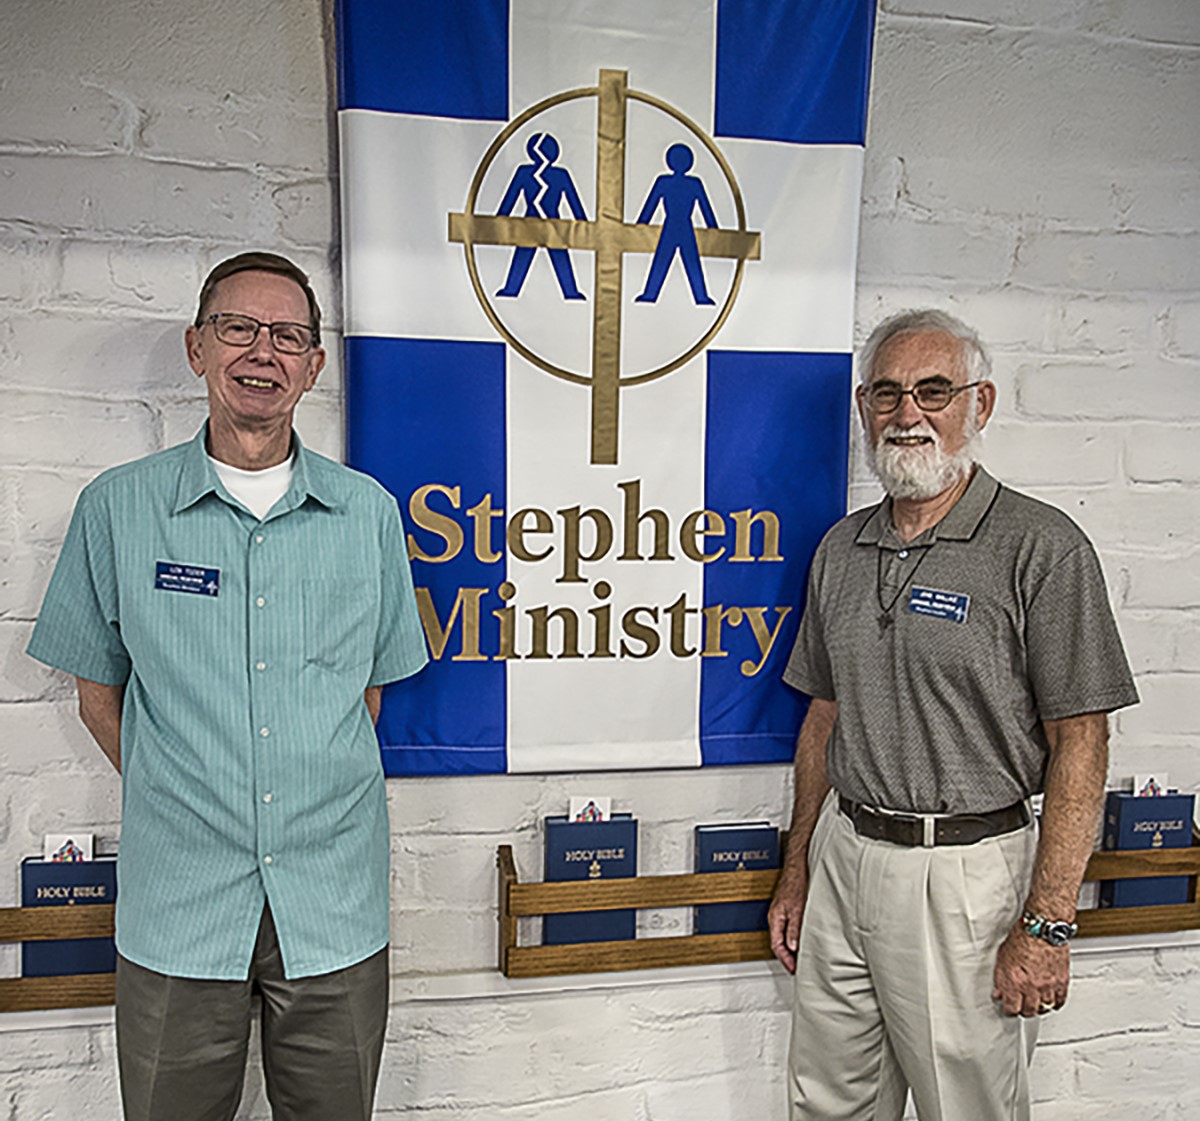 Two smiling men standing on either side of a blue and white banner with the Stephen Ministry logo